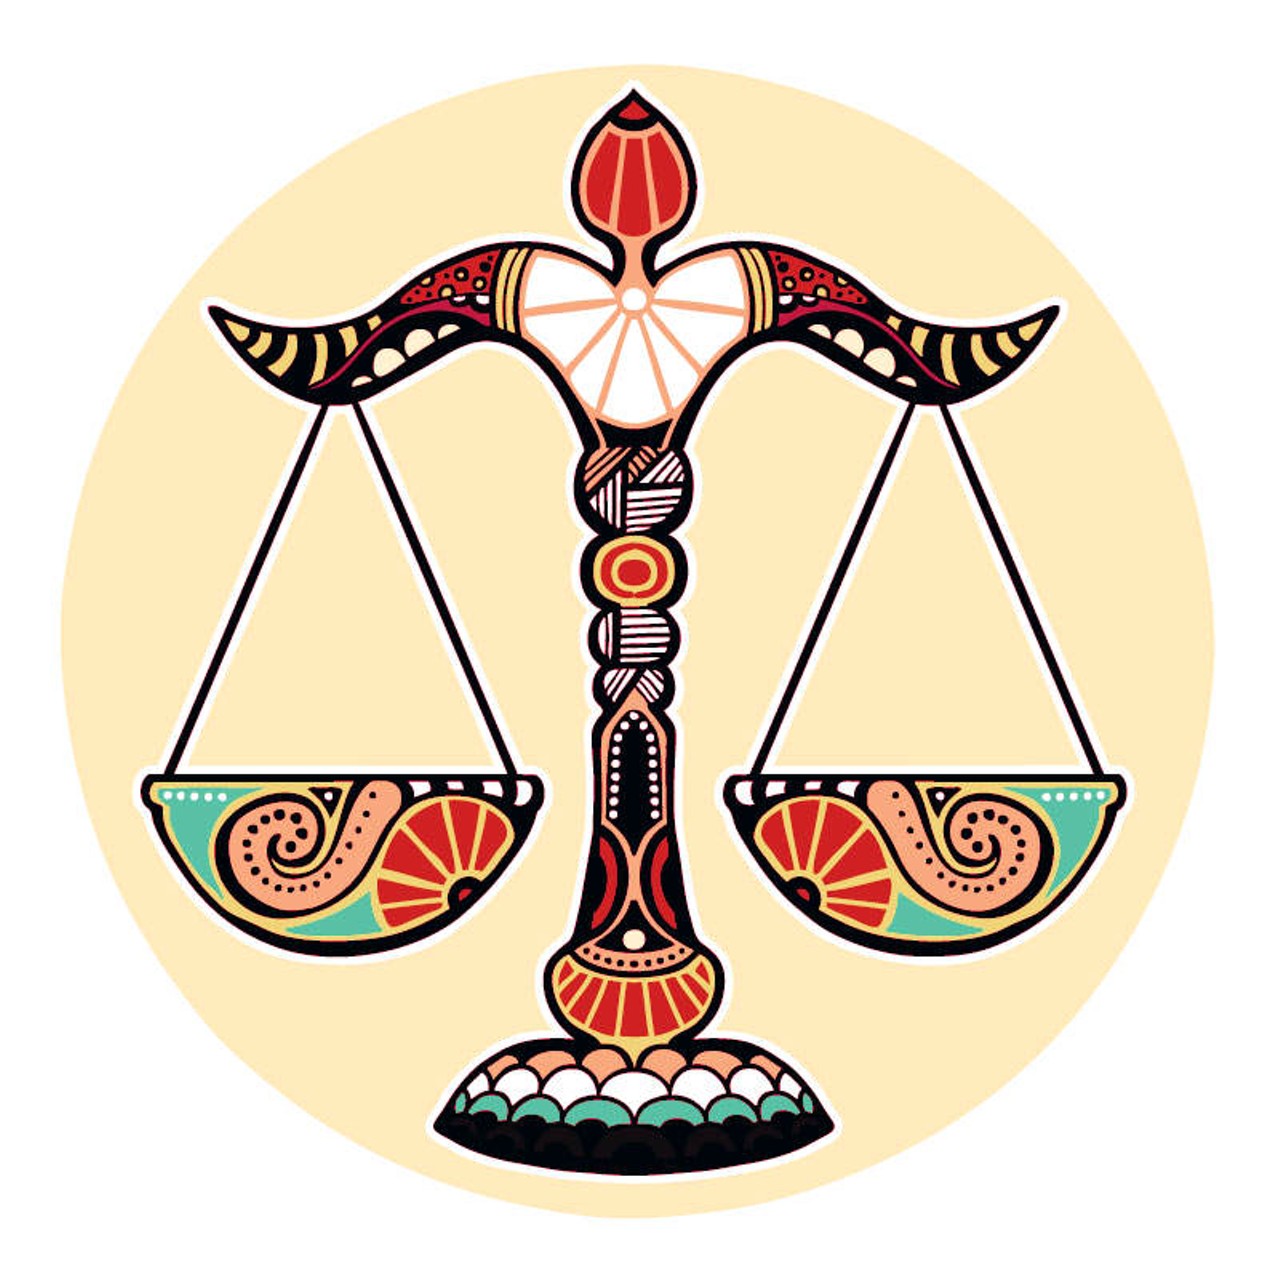 LIBRA (Sept. 21-Oct. 20): 
This isn&#146;t what you thought it would be. You&#146;re not so sure you want to get involved with people who are hell bent on turning everything around. Before you get too committed to this plan of theirs ask yourself if you want to hand what amounts to your life over to someone who doesn&#146;t understand what it took to get here. If things don&#146;t sit right with you there&#146;s a reason for it. High pressure tactics, strategic ploys, and polished demeanors are starting to make you feel like you&#146;re being played. Don&#146;t exclude any option that allows you to maintain yourself with sketchy people.